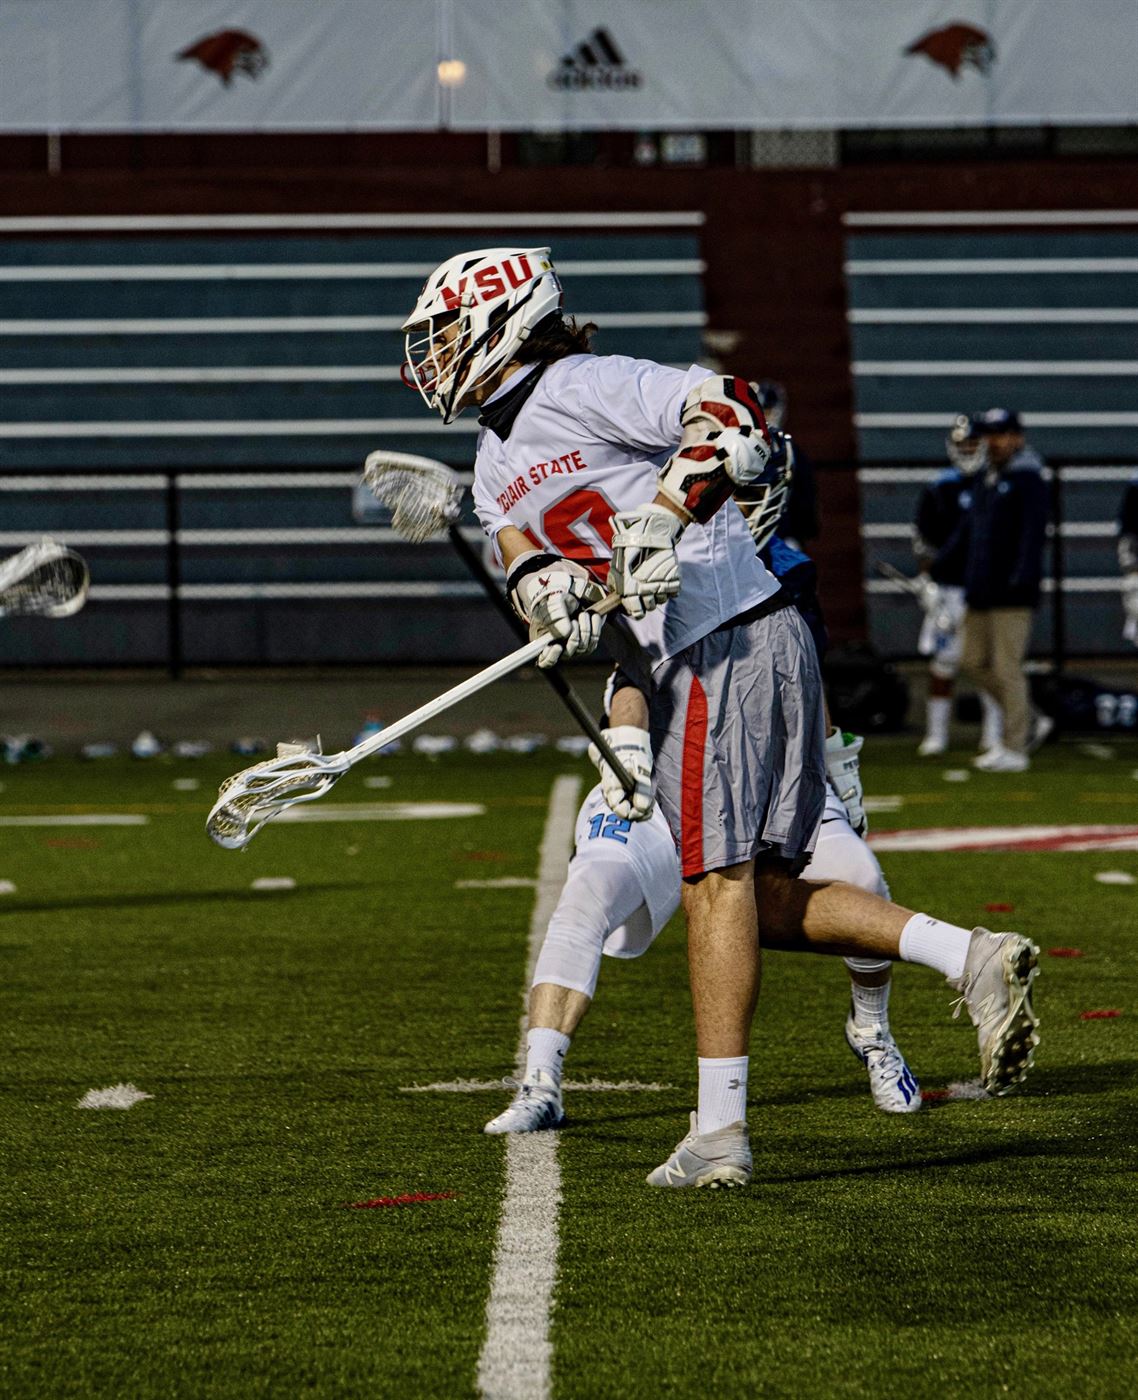 Red Hawks junior attacker Robert Brennan leans forward to take a shot as he scores his first goal of the season. David Venezia | The Montclarion